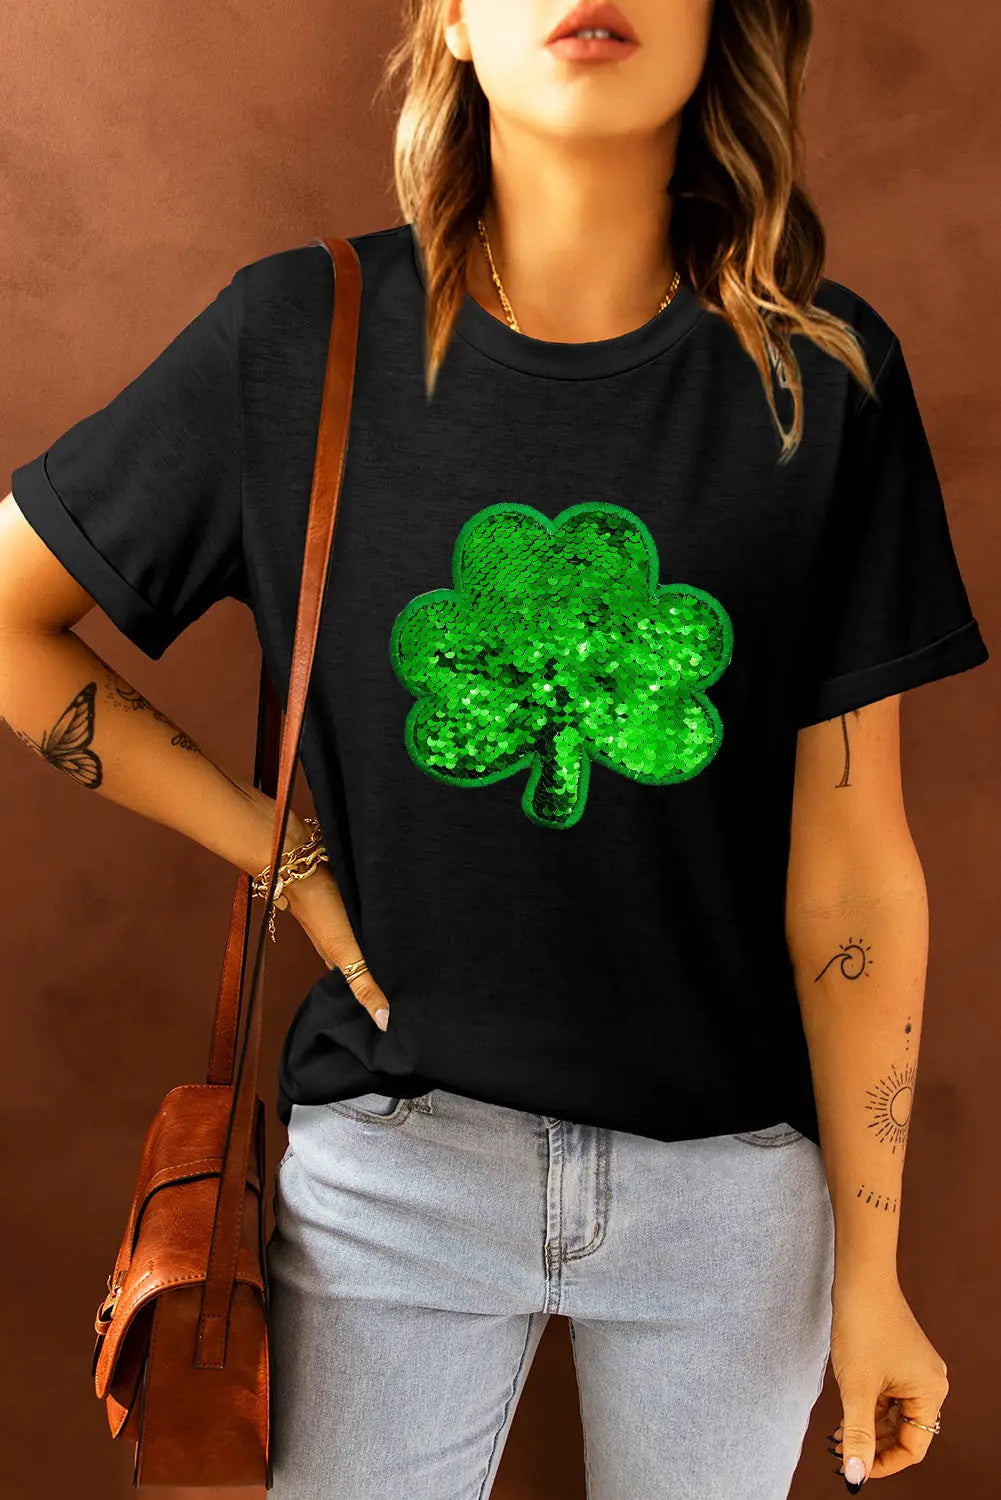 Black sequin clover embroidered round neck graphic tee - t-shirts